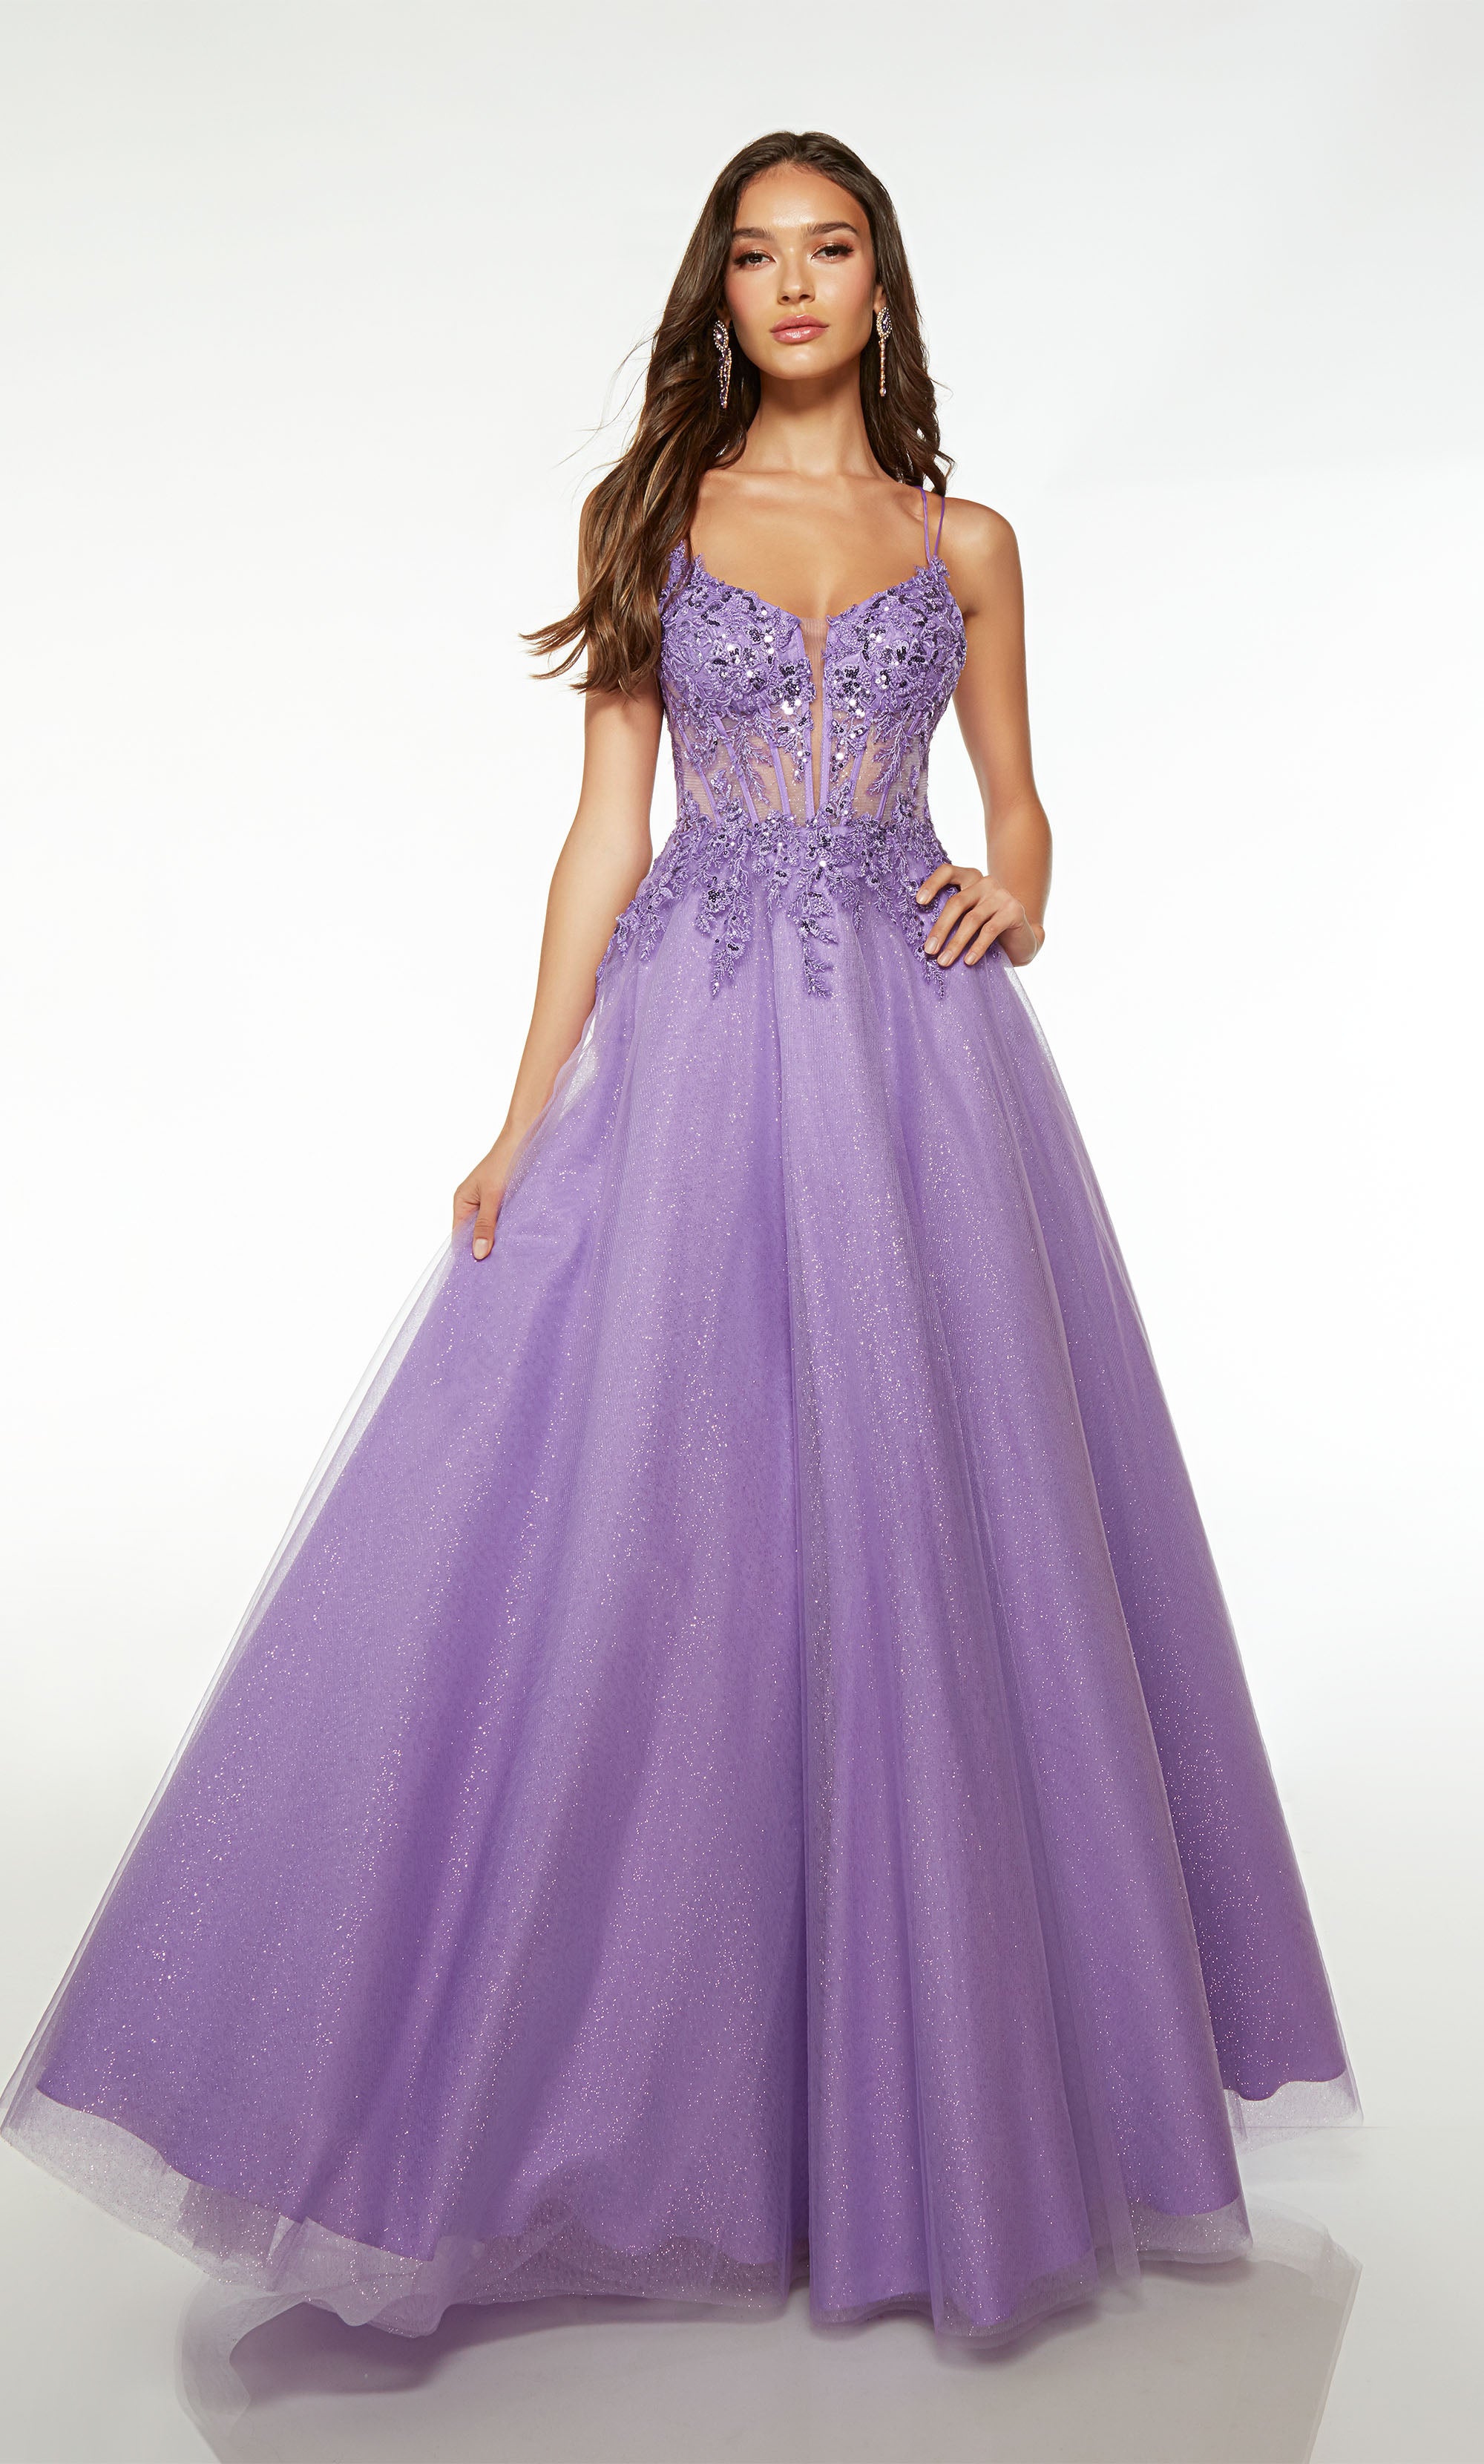 Pretty glitter tulle purple ball gown with an sheer corset bodice, sequined floral lace appliques, dual spaghetti straps, crisscross lace-up back, and an slight train.